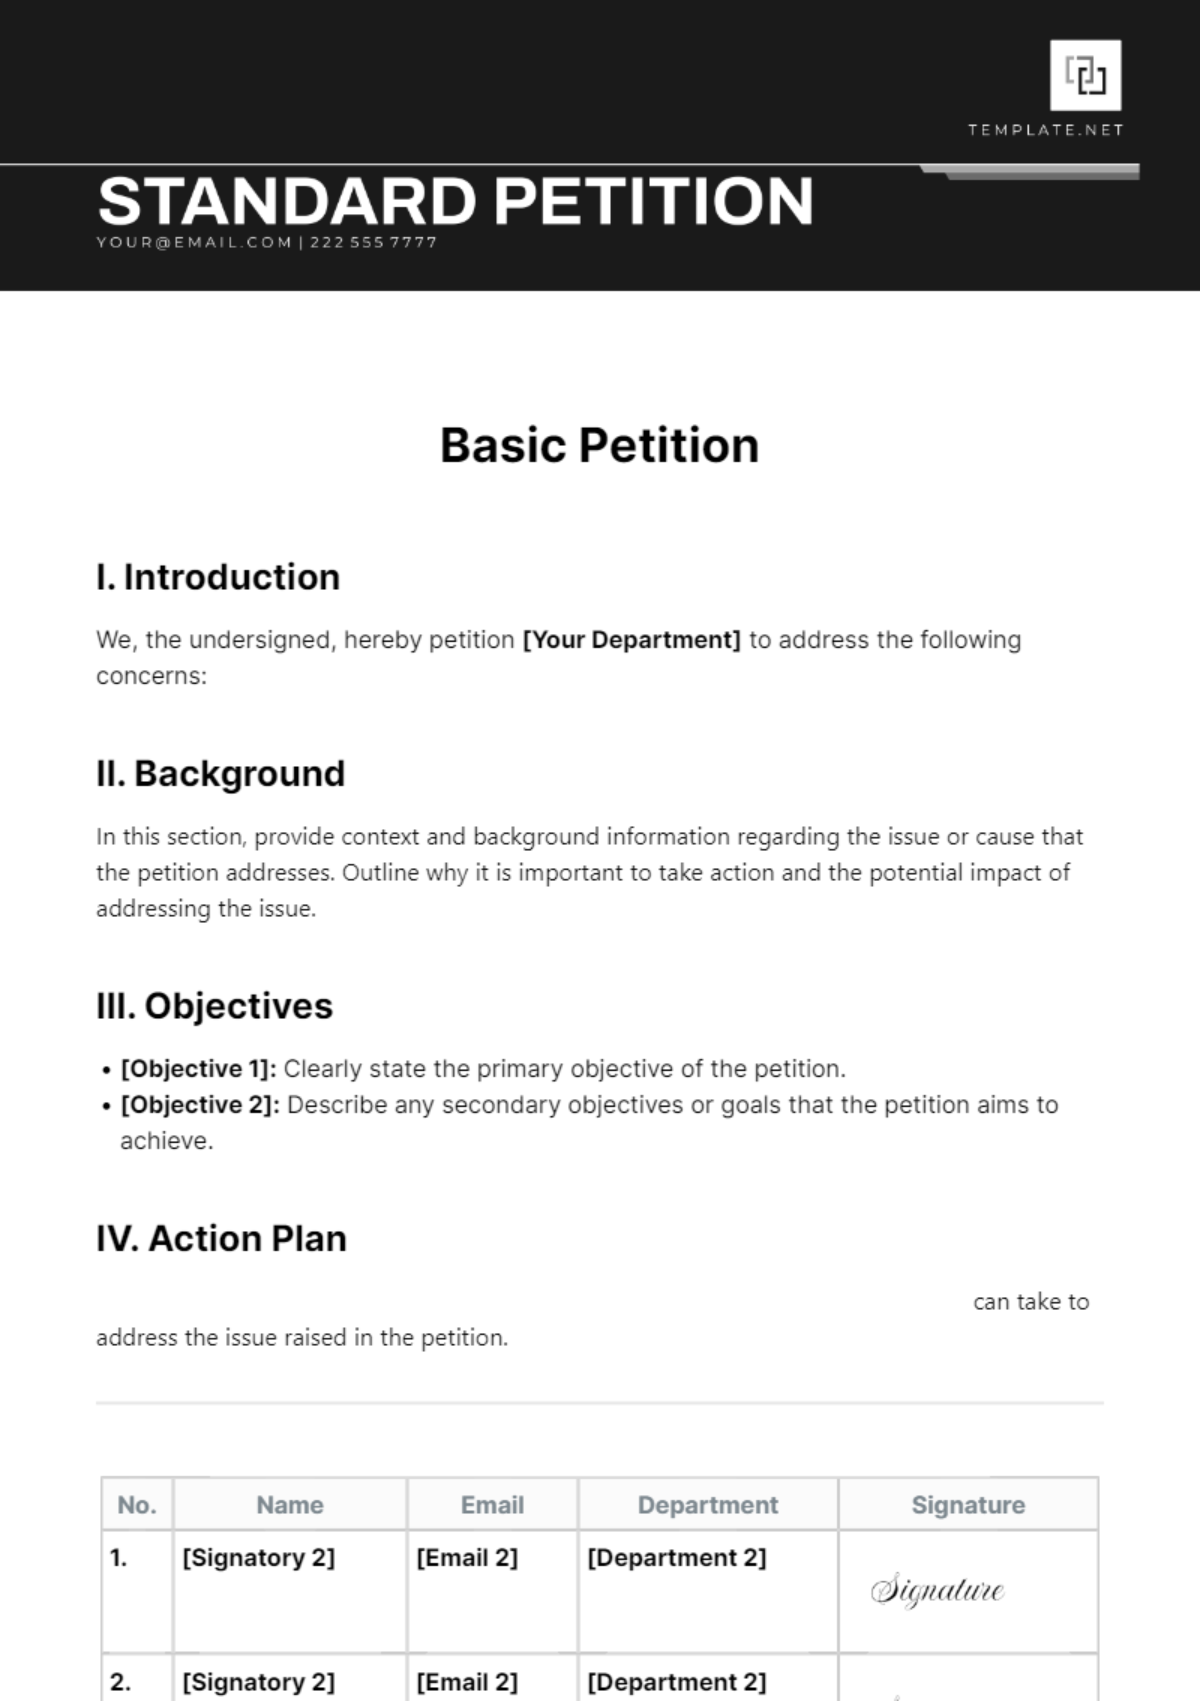 Basic Petition Template